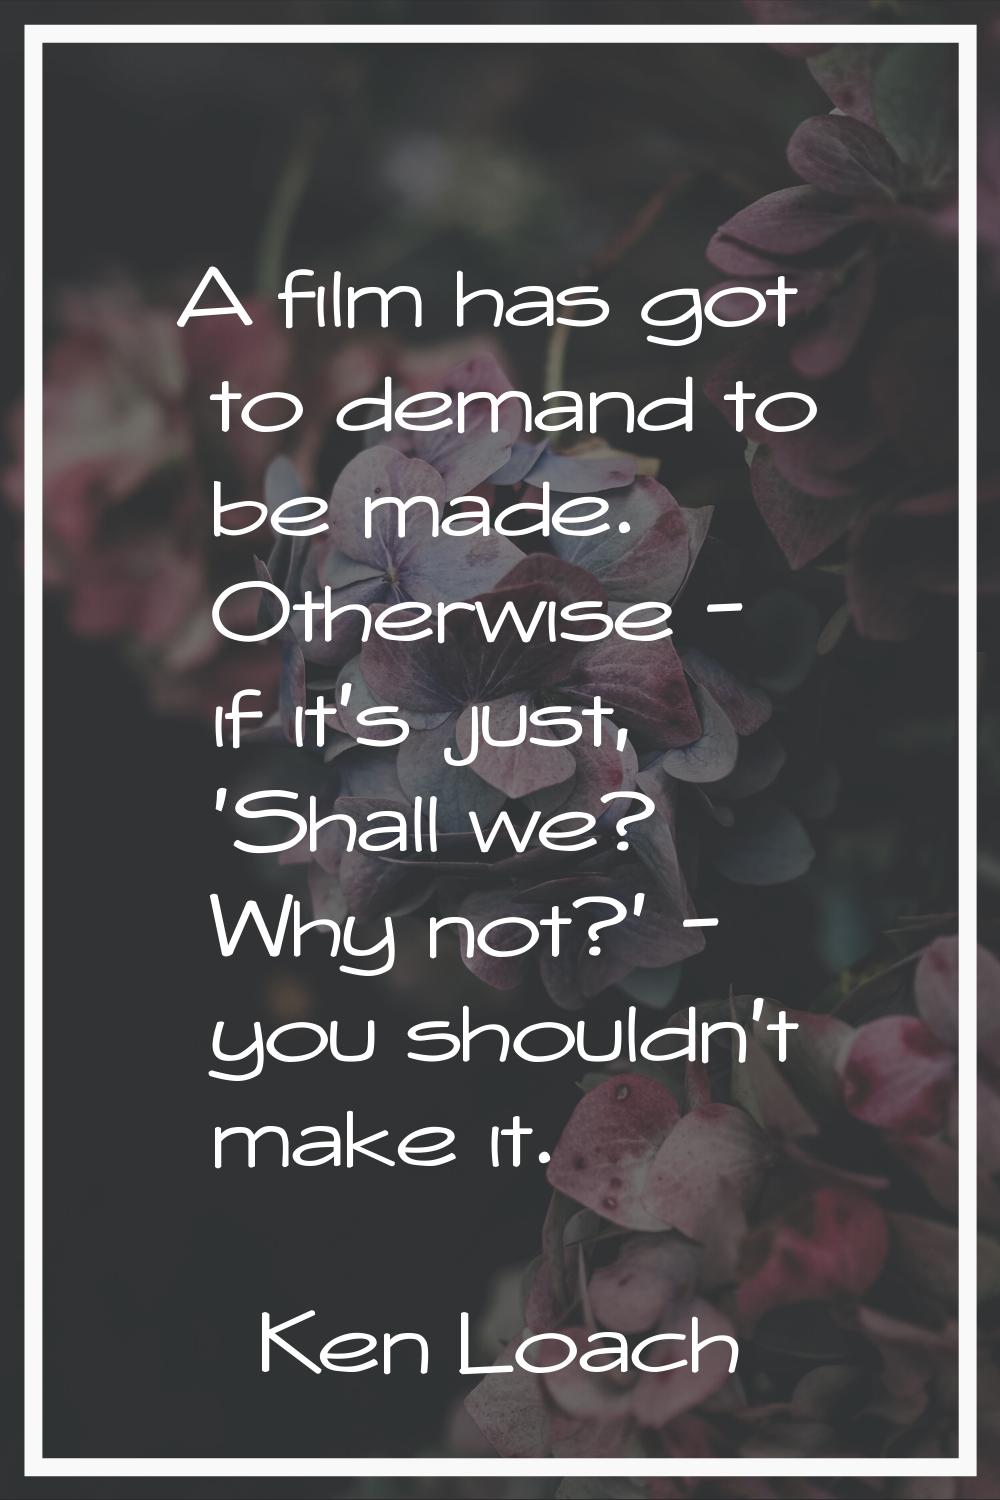 A film has got to demand to be made. Otherwise - if it's just, 'Shall we? Why not?' - you shouldn't